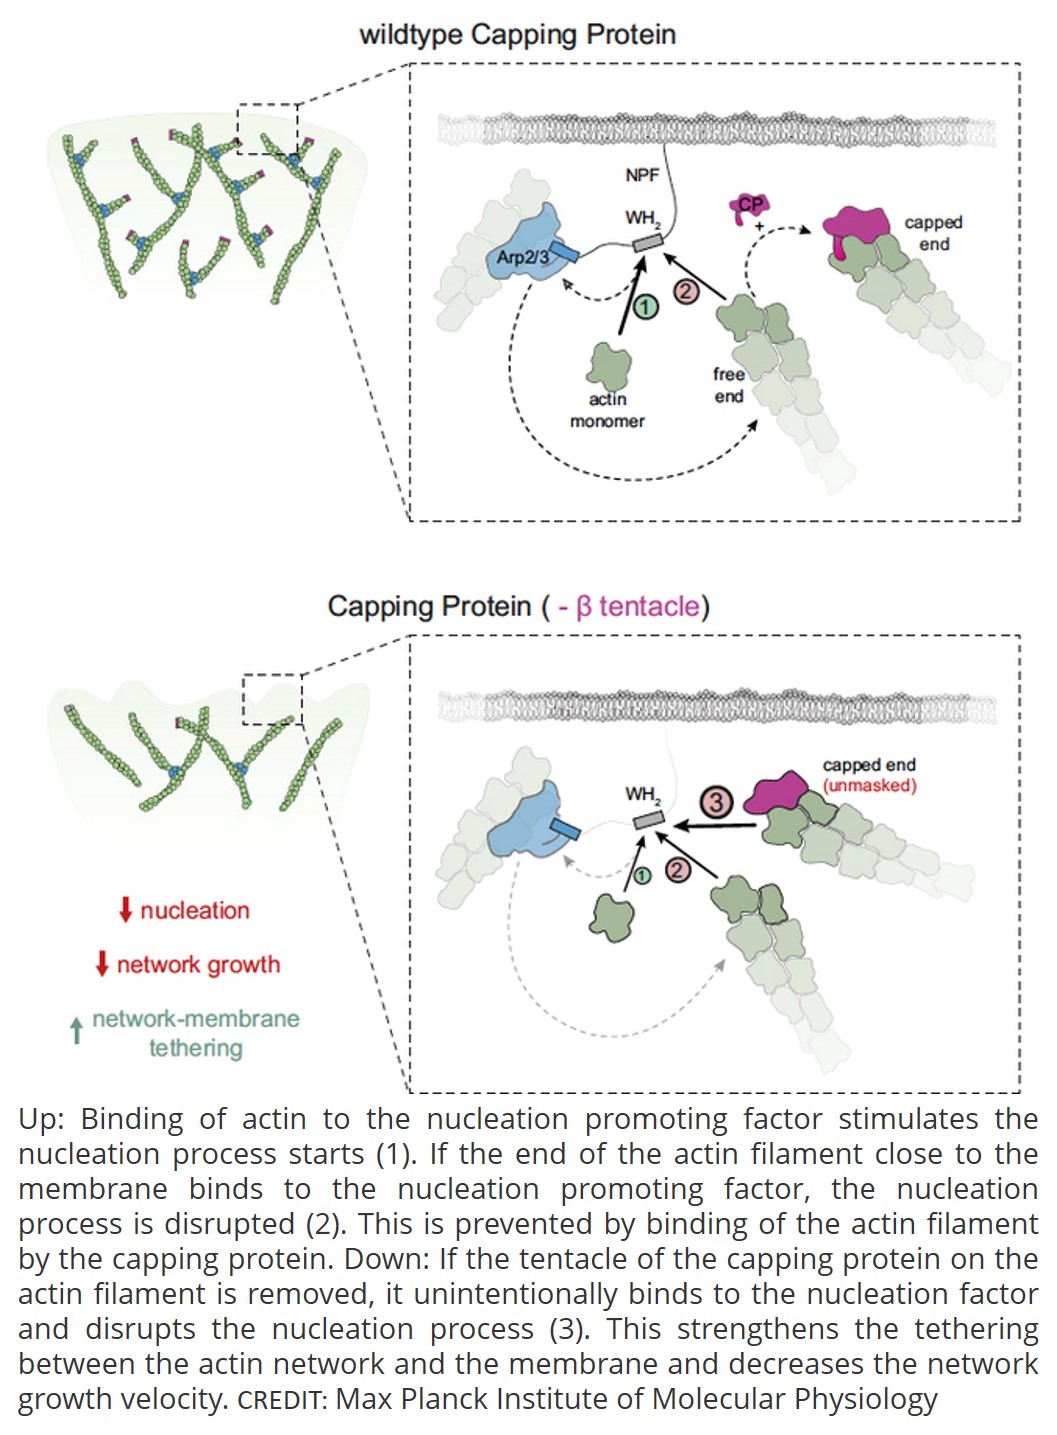 How pruning the cytoskeleton moves the cell